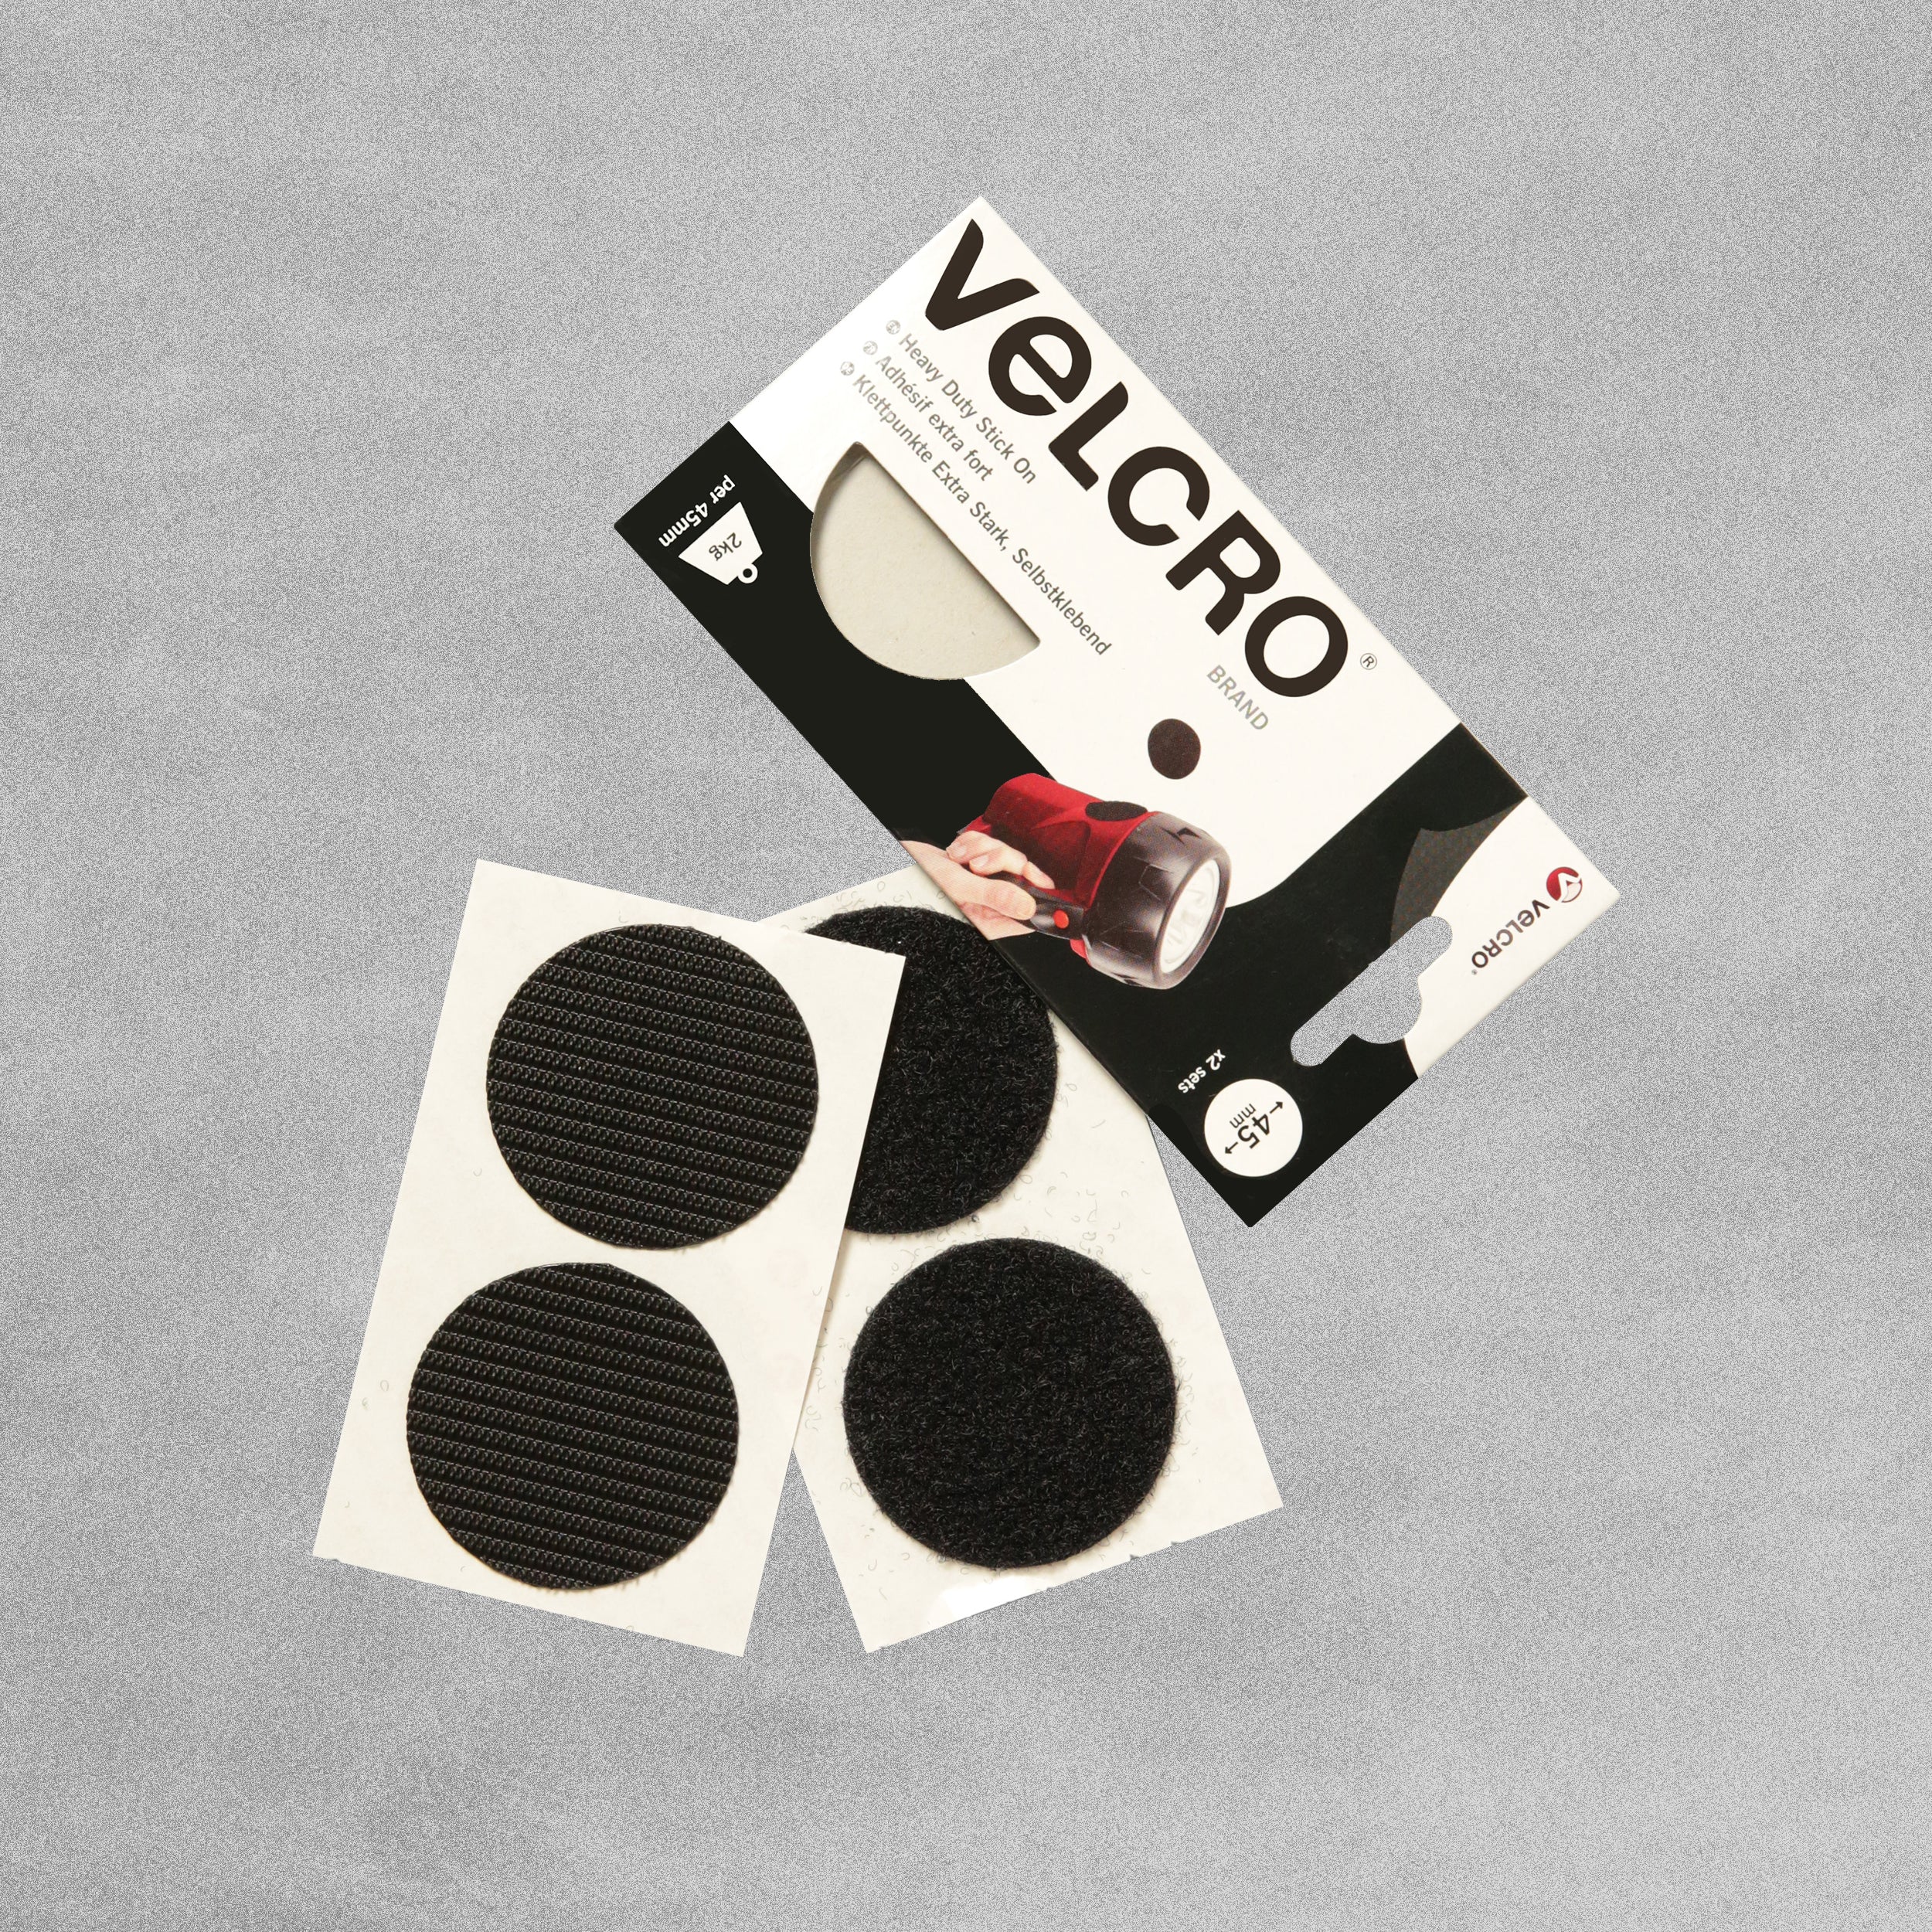 Velcro Brand Heavy Duty Stick On Coins 45mm Black - Pack of 2 Sets